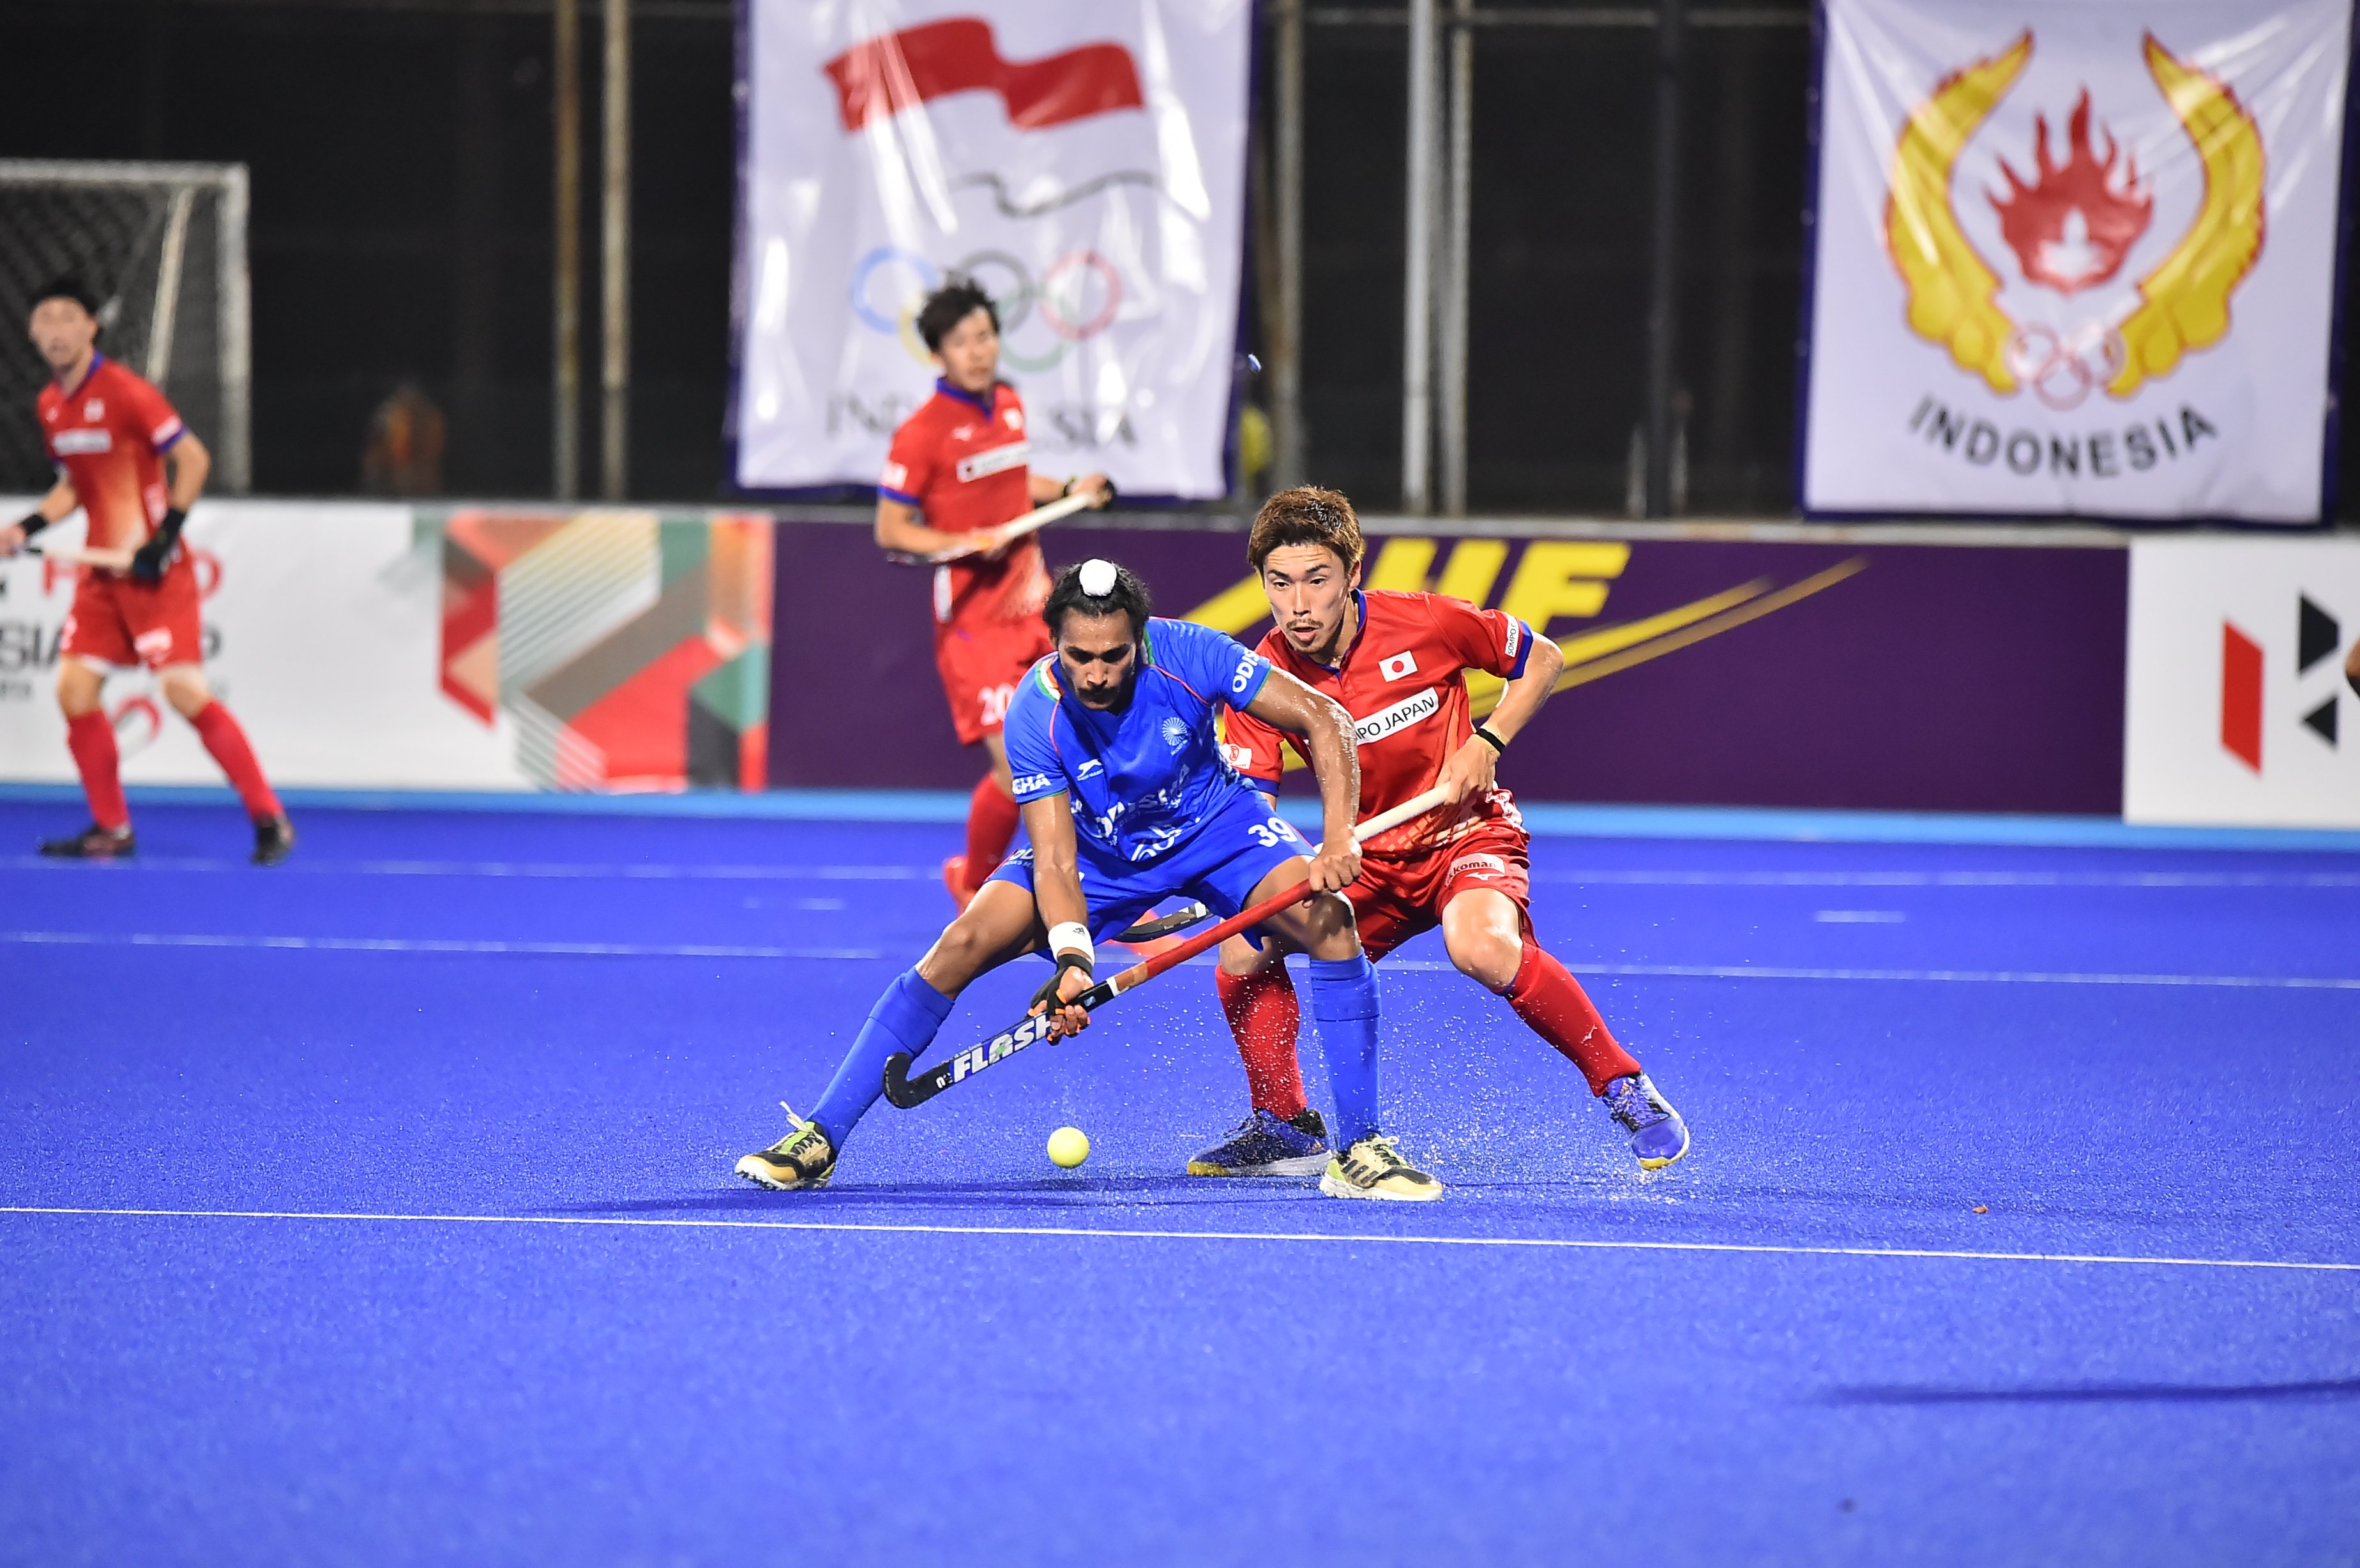 Asia Cup Hockey LIVE: Japan trumps India with 5-2 victory in second group match of Asia Cup - Follow India vs Japan Highlights